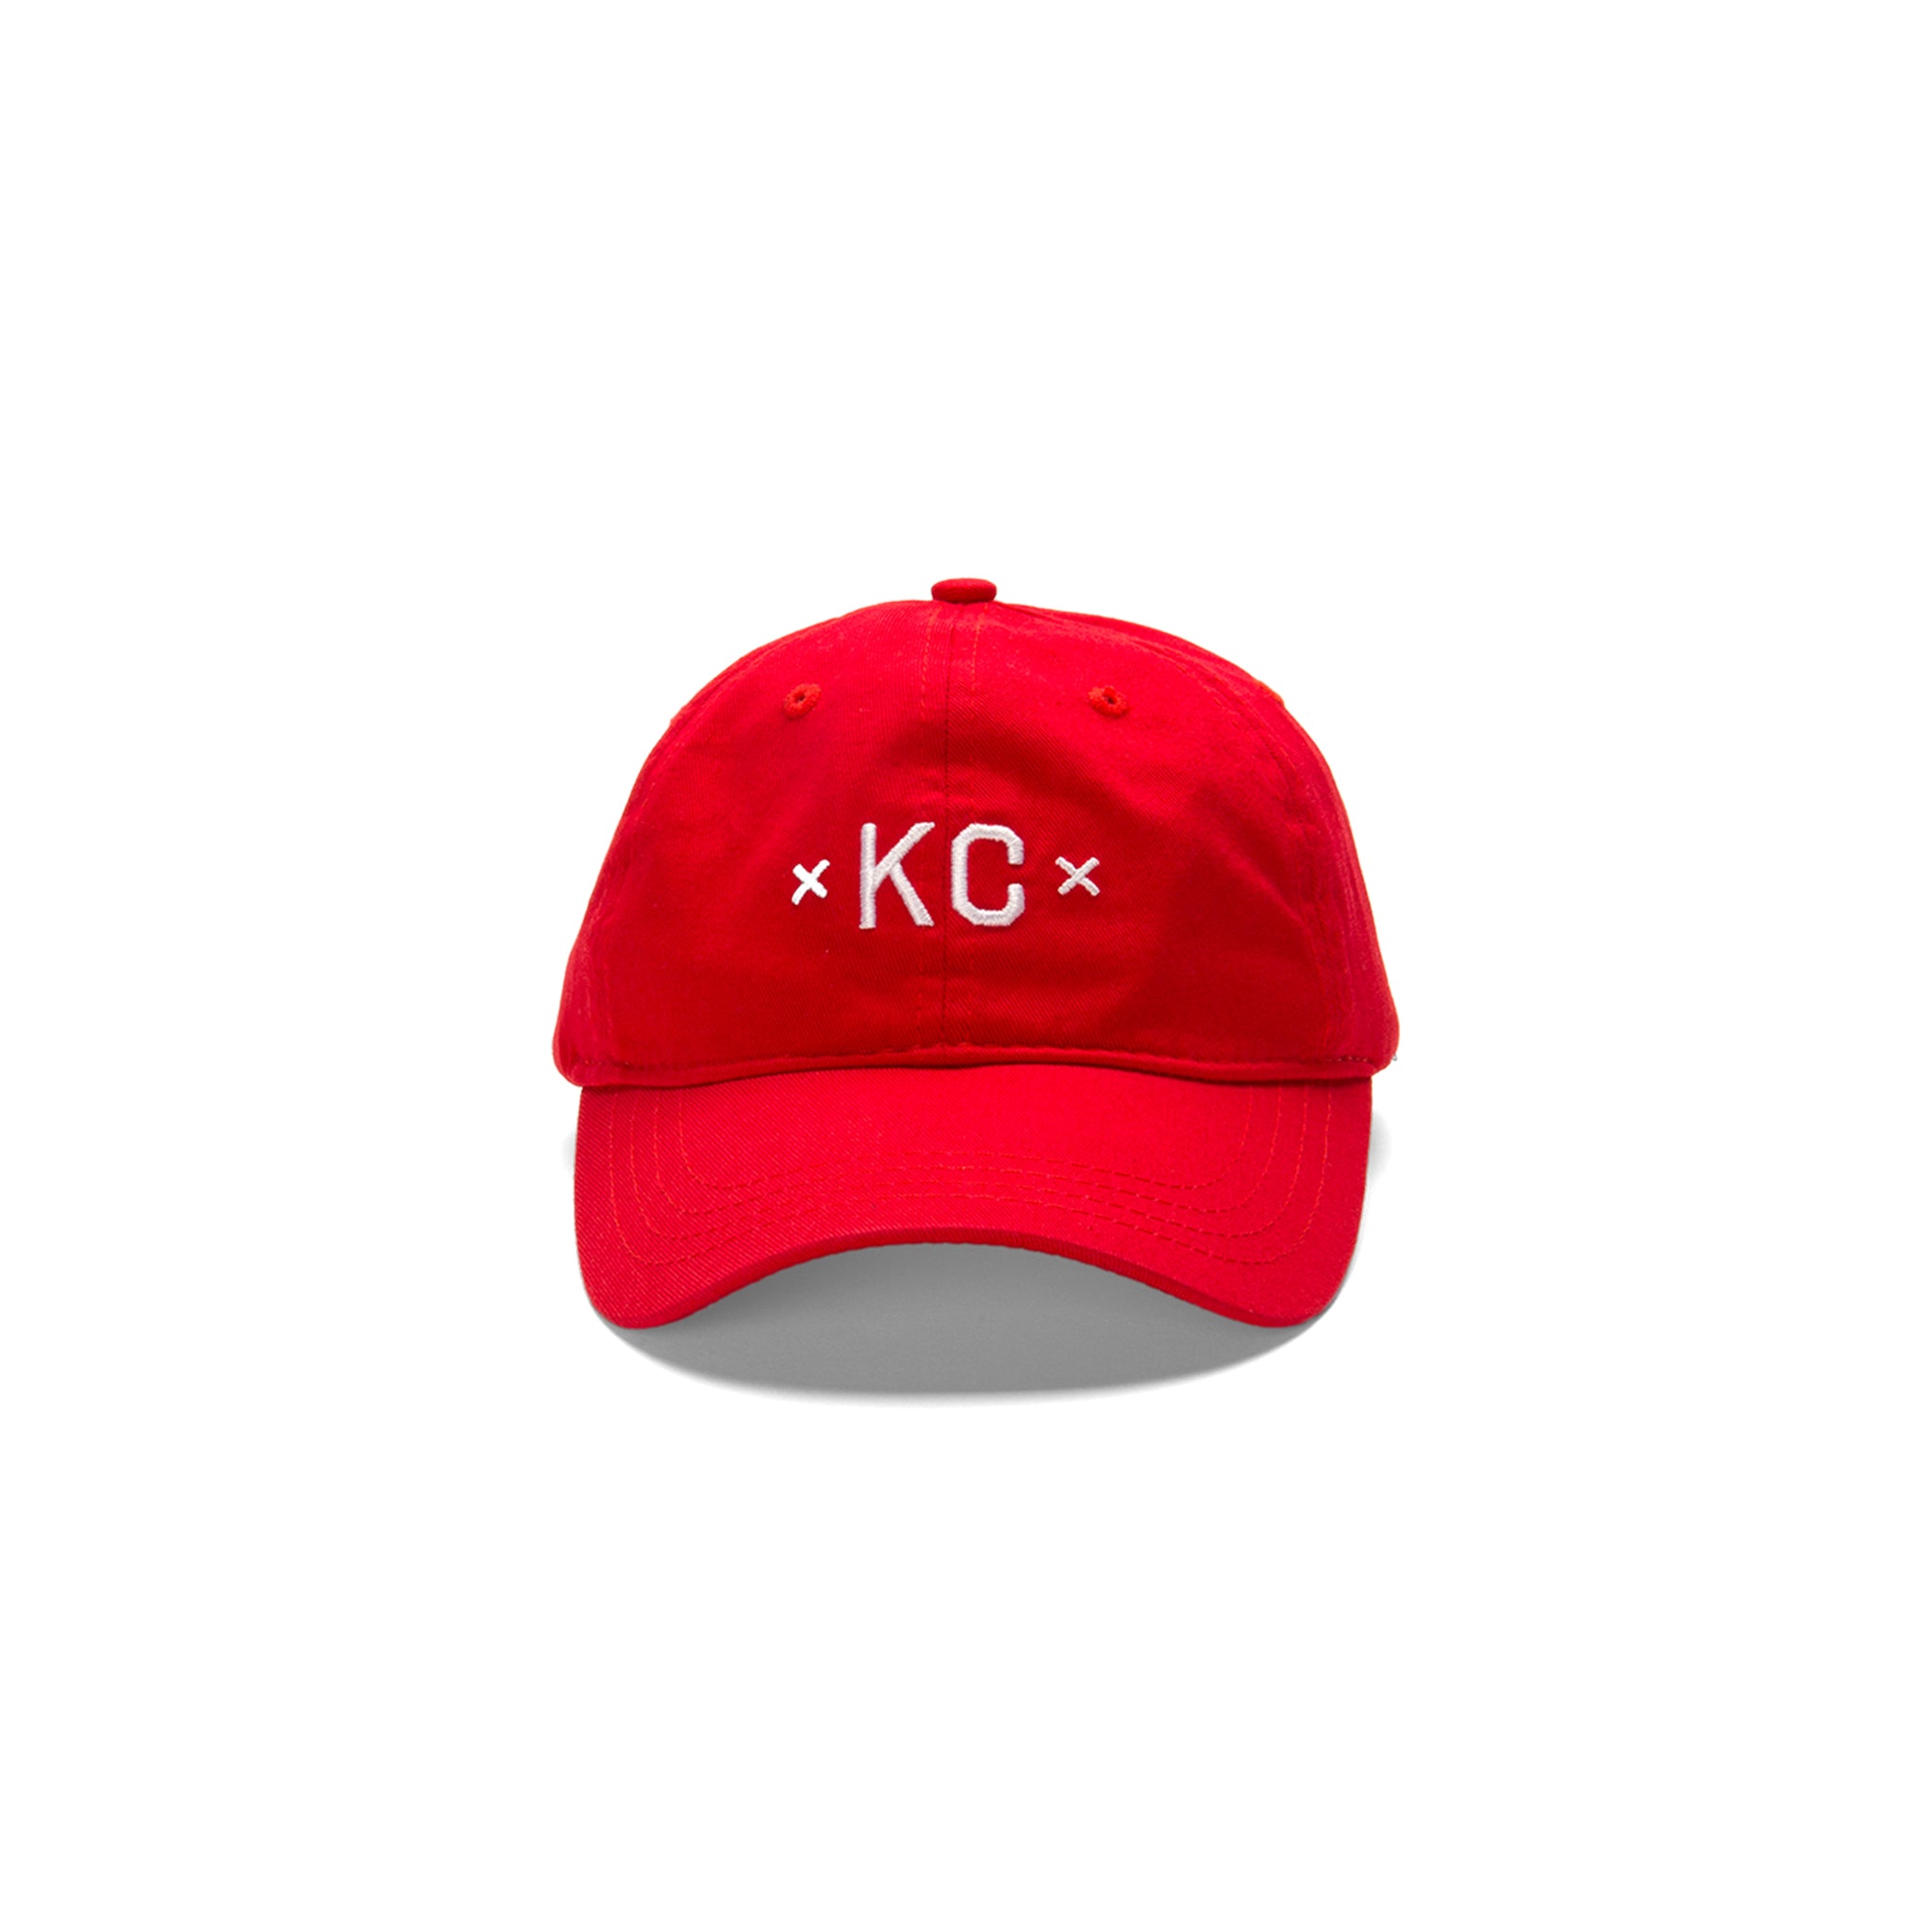 Signature KC Dad Hat - Red by Made Mobb